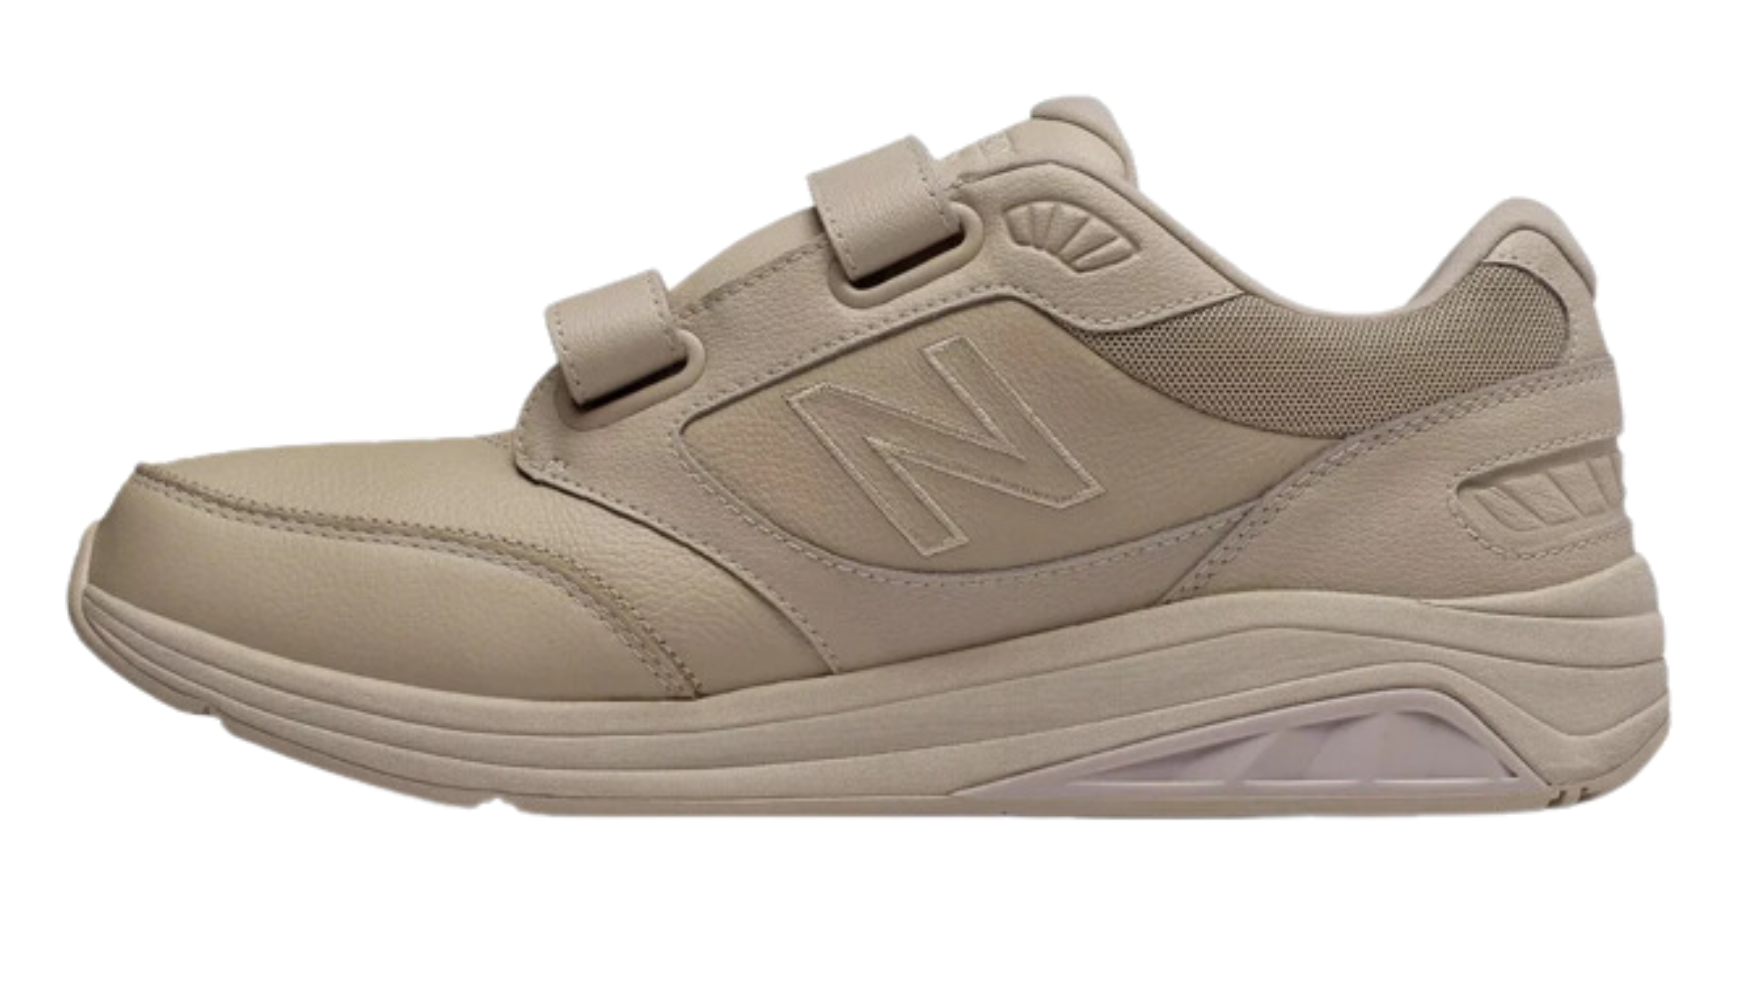 MEN'S HOOK AND LOOP LEATHER 928V3  MADE IN USA - MENS NEW BALANCE MEN'S NEW BALANCE MW928HN3 TAN LEATHER TAN LEATHER MEN'S NEW BALANCE MW928HN3 TAN LEATHER BONE COLOR WALKING SHOES BRANDYS SHOES